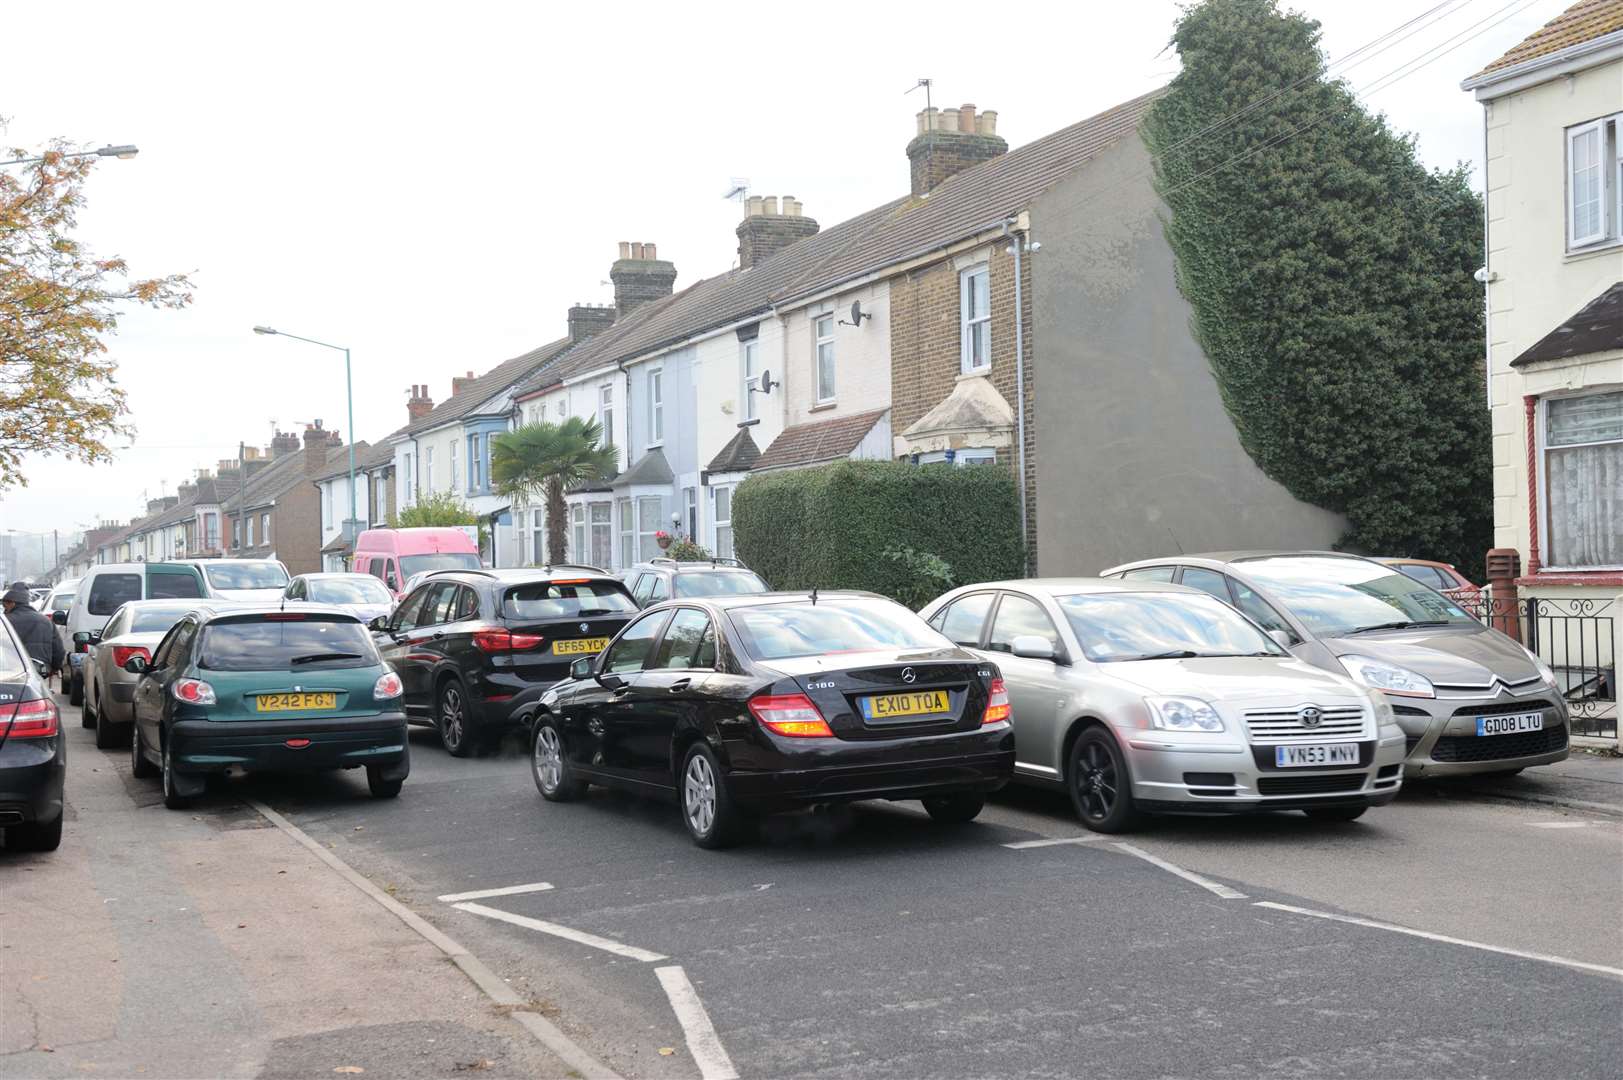 Residents say traffic in the area has already reached an unacceptable level